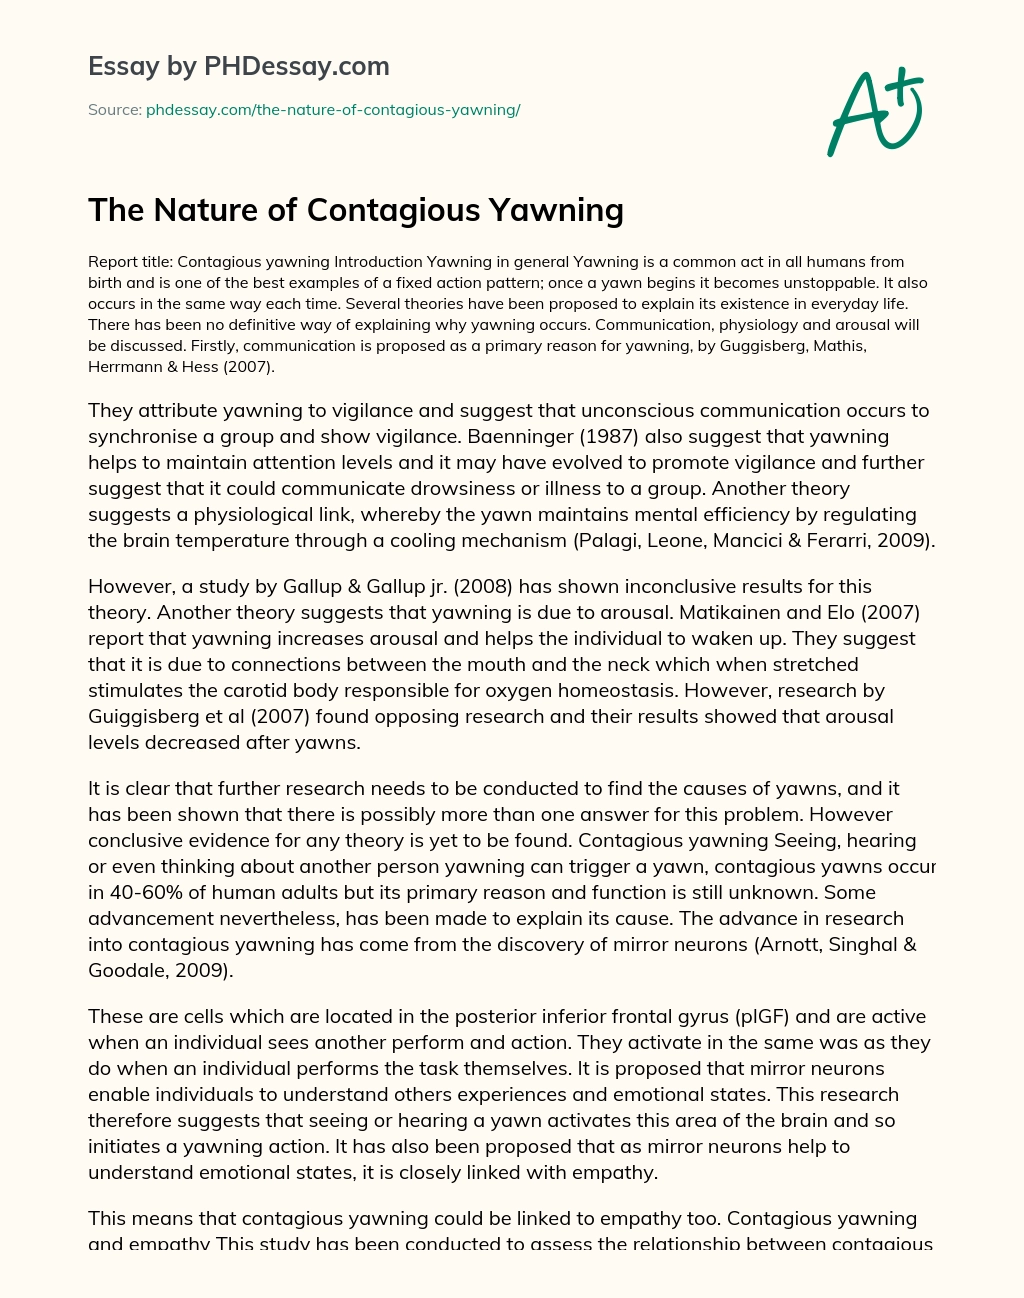 The Nature of Contagious Yawning essay